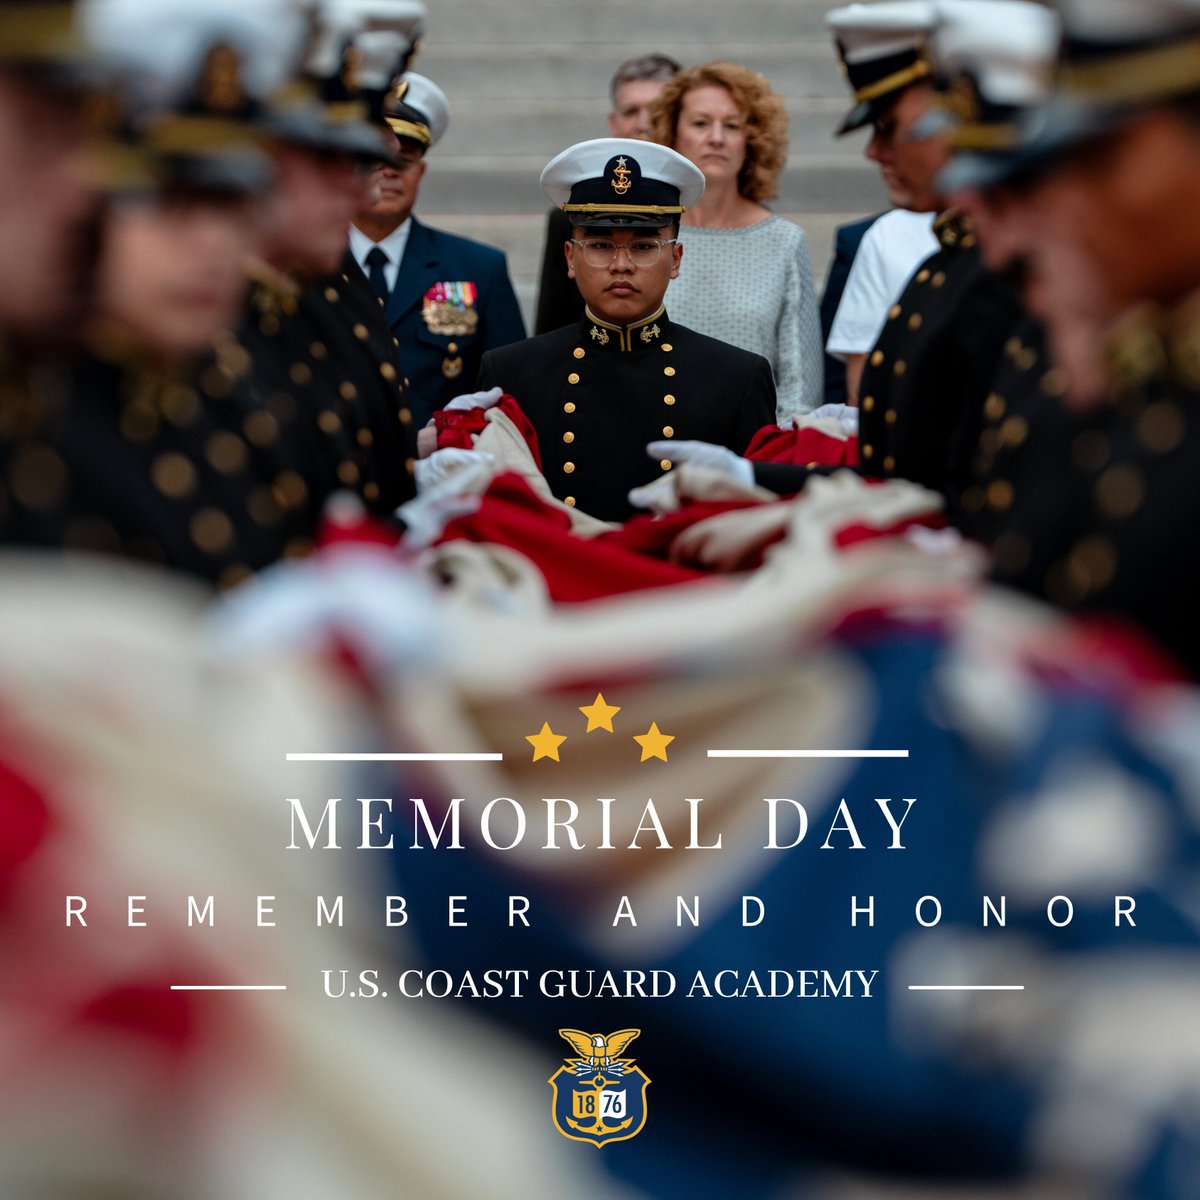 🇺🇸 Today, we honor and remember the brave women and men who made the ultimate sacrifice for our freedom. This #MemorialDay, the @USCG Academy pays tribute to the fallen heroes who served with courage and dedication. We are forever grateful.